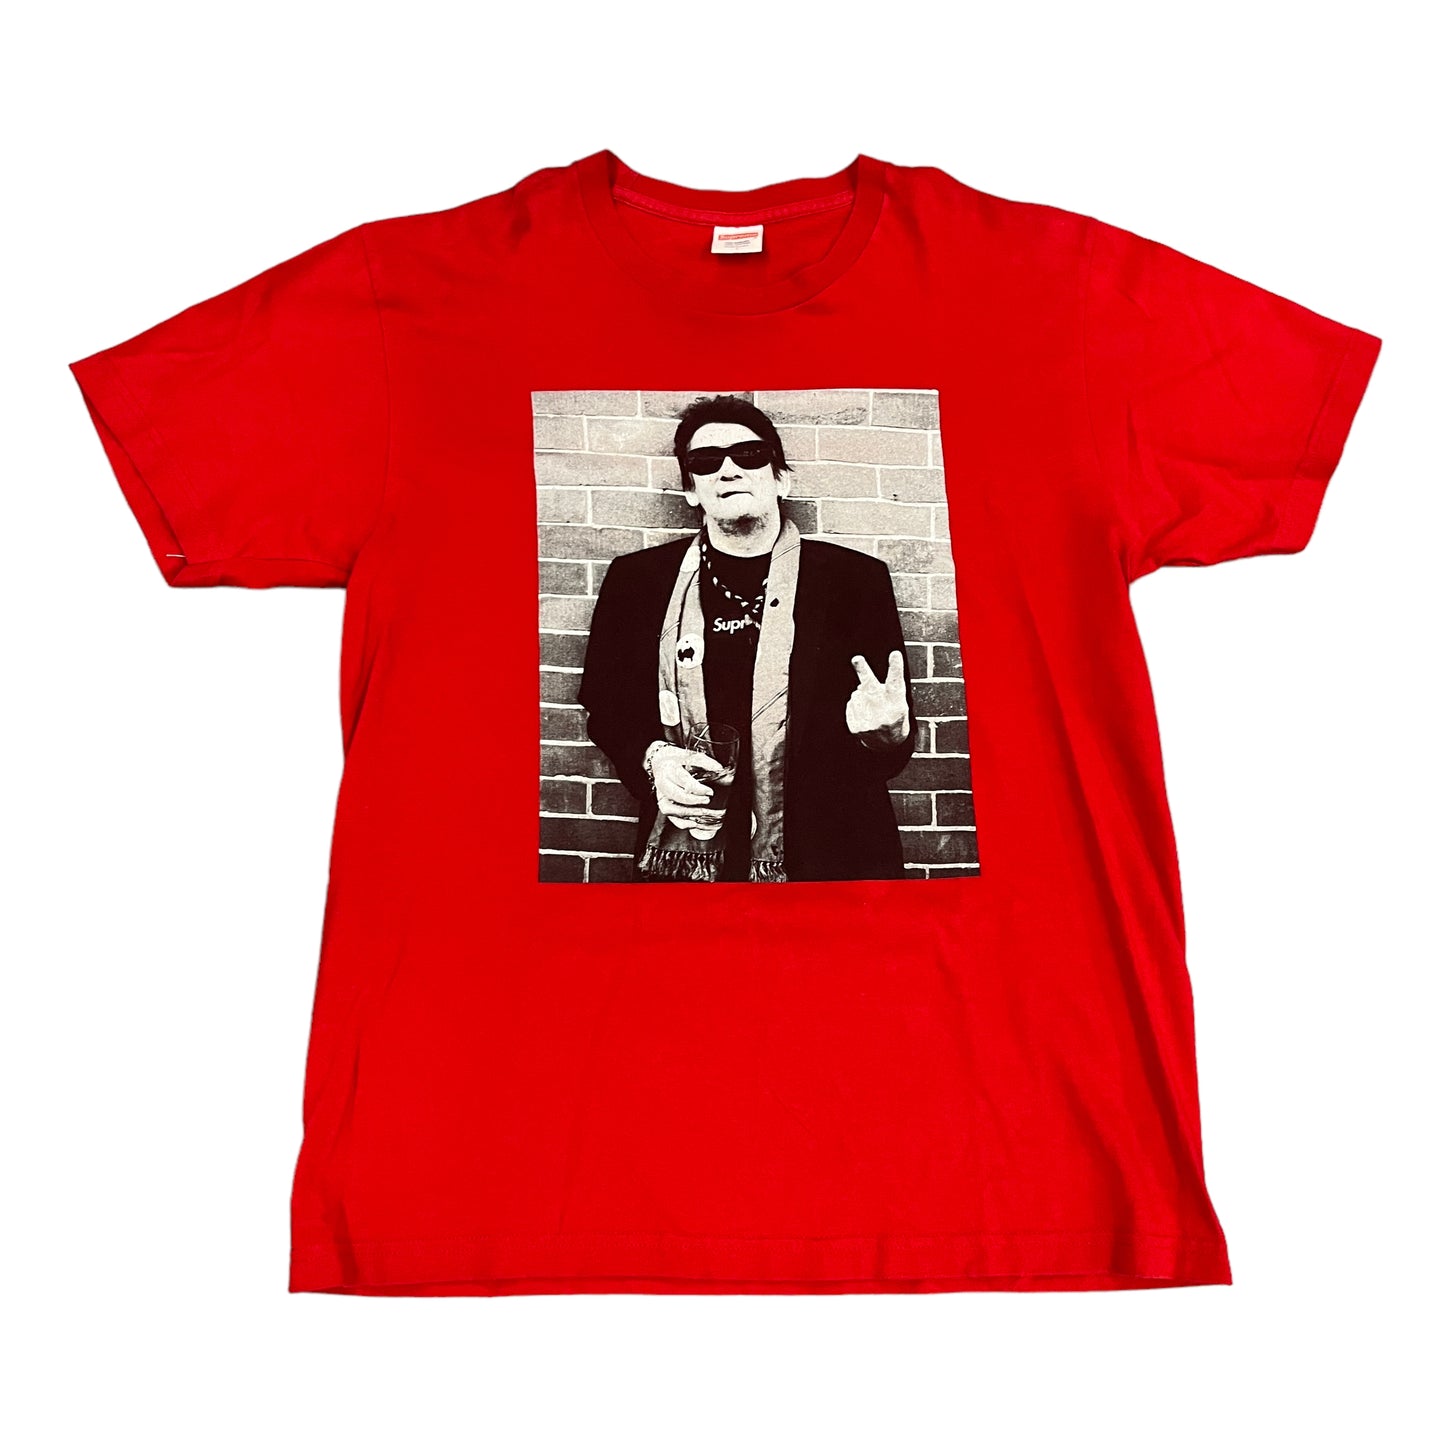 Supreme Boys From County Hell Red Photo Tee